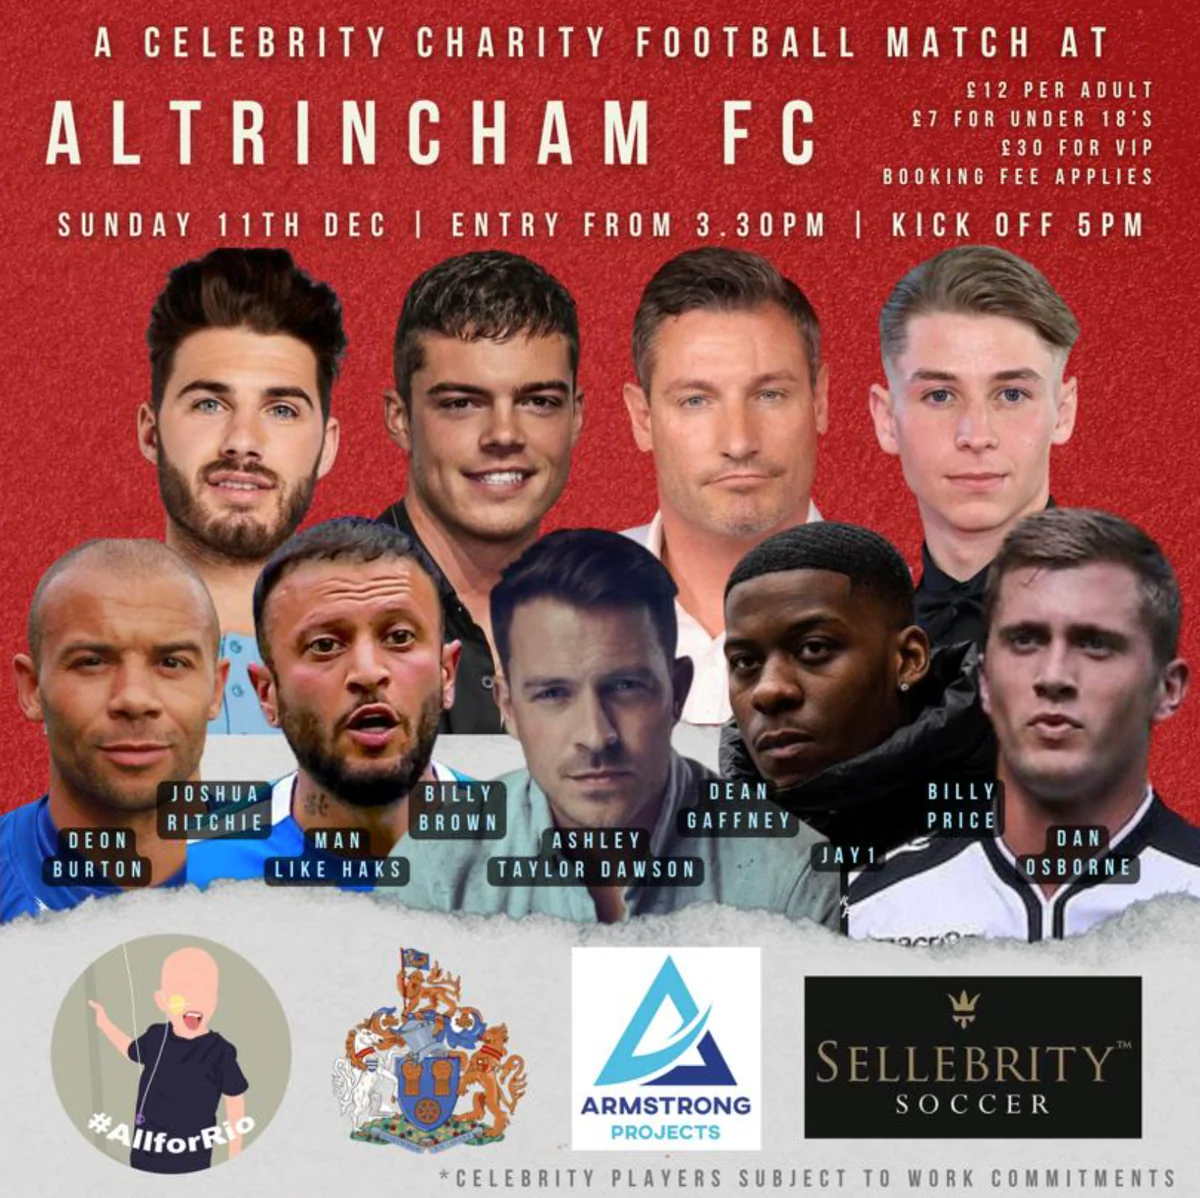 Rio Spurr charity game confirmed celebrities